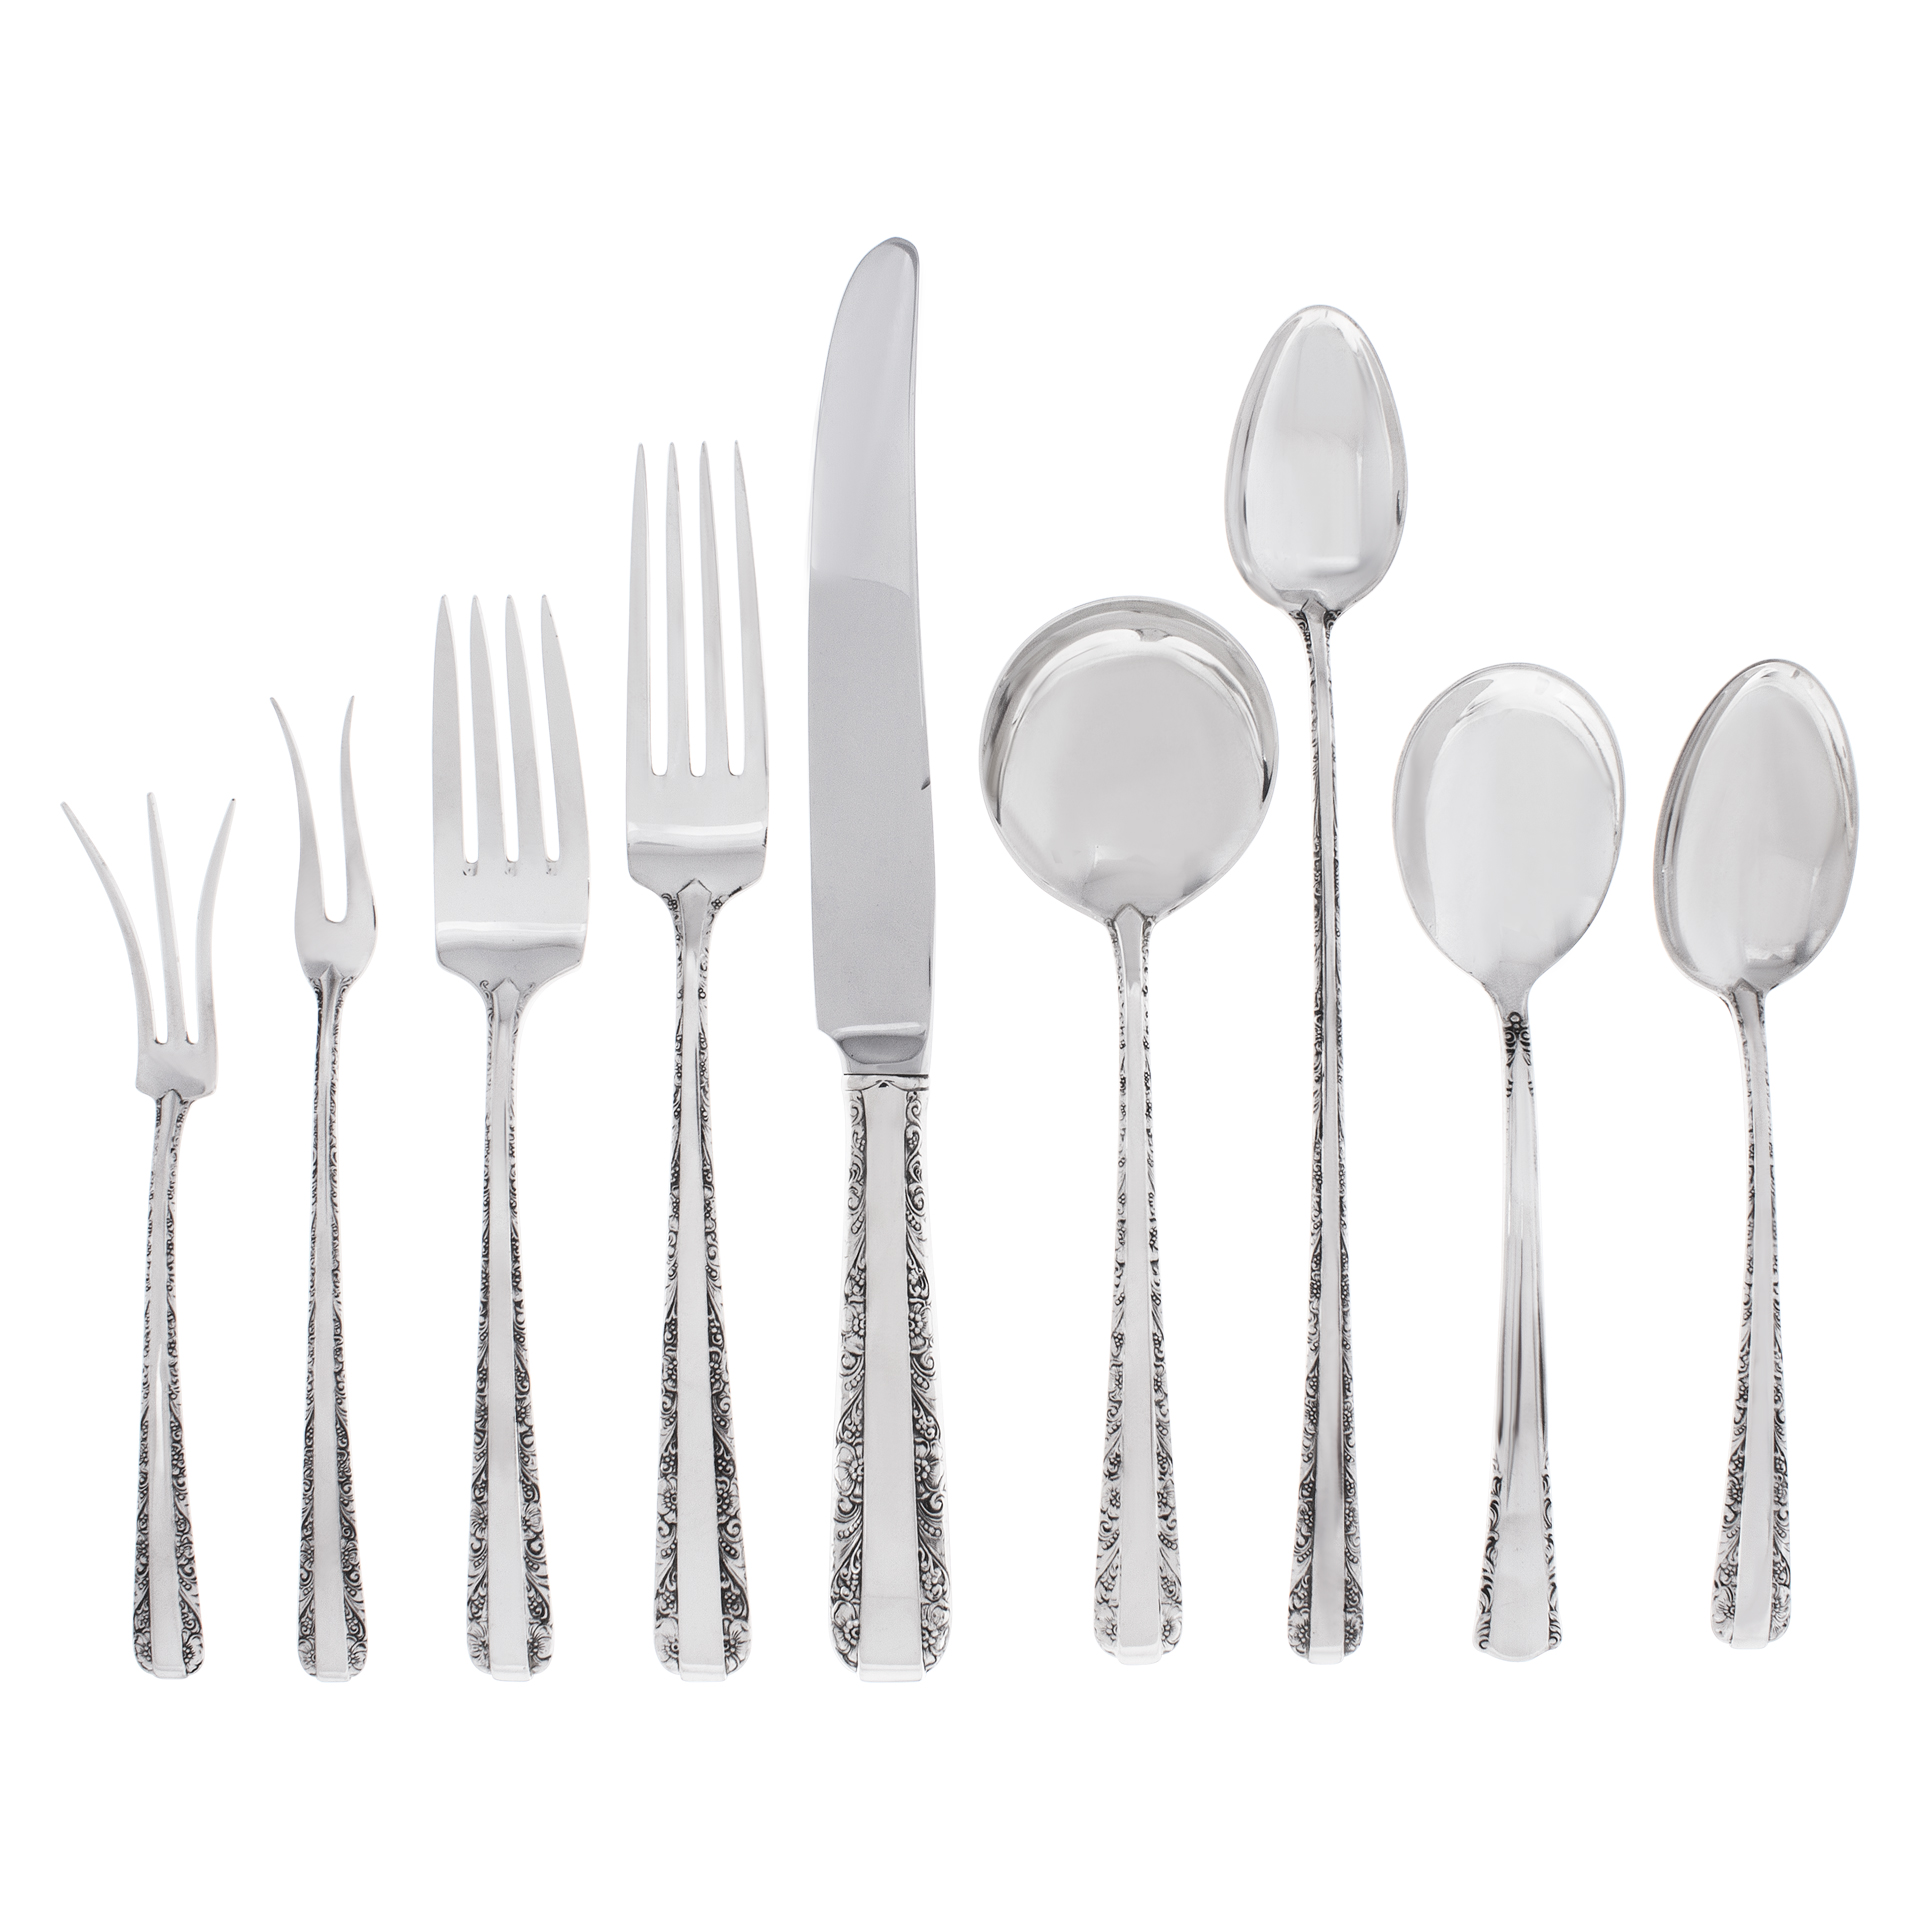 Candlelight Sterling Silver Flatware Set Patented In 1934 By Towle. 5 Place Setting For 8 (With Xtra), And 9 Serving Pieces. 62 Pieces Total.